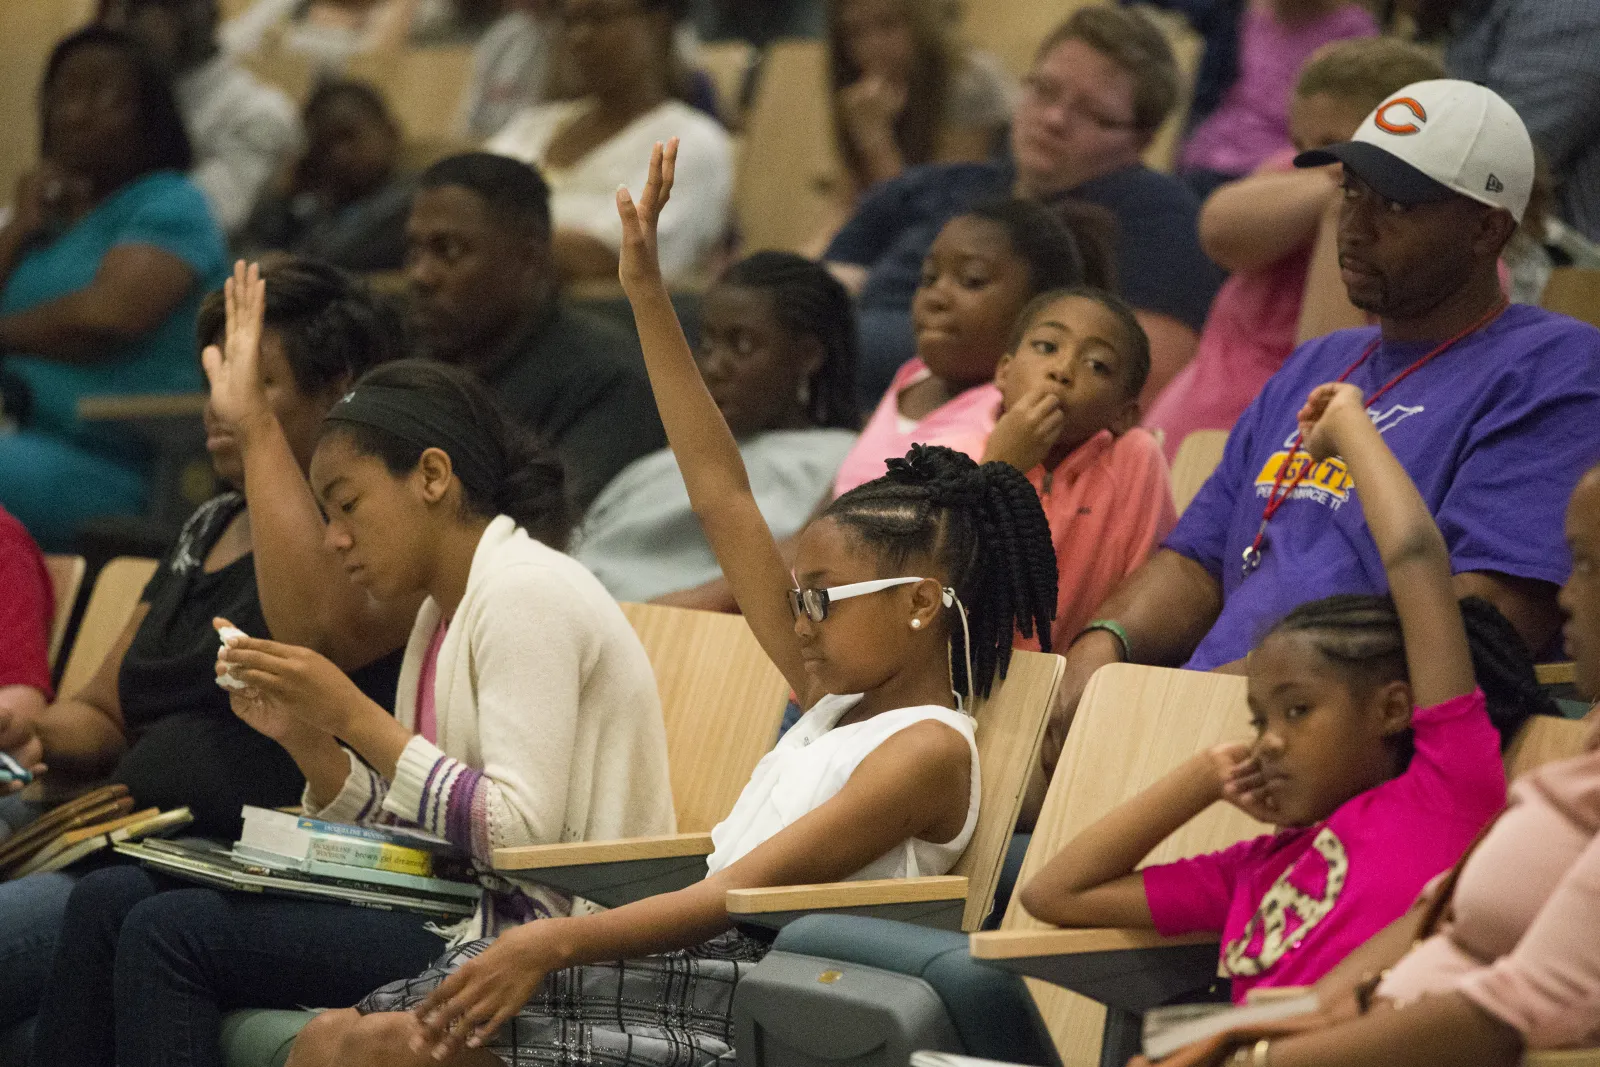 Children raise their hands during an event at Richland Library